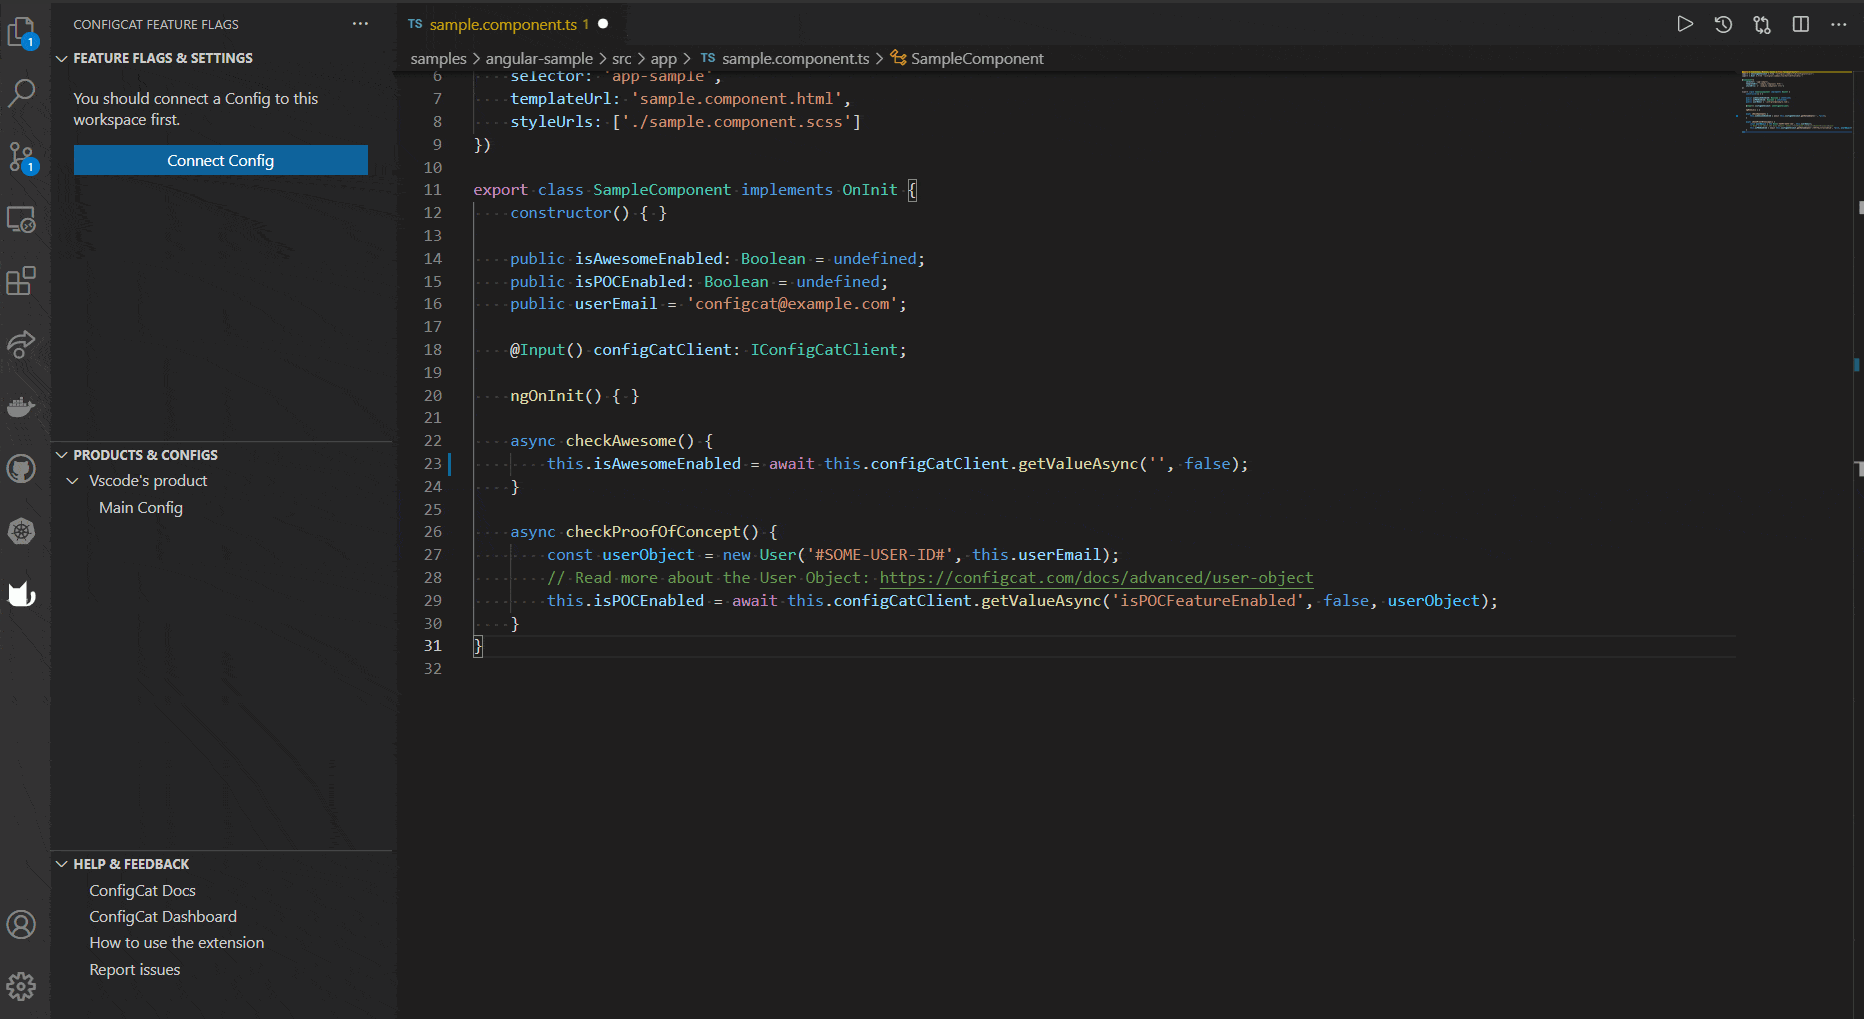 Usage of ConfigCat Feature Flags Visual Studio Code Extension